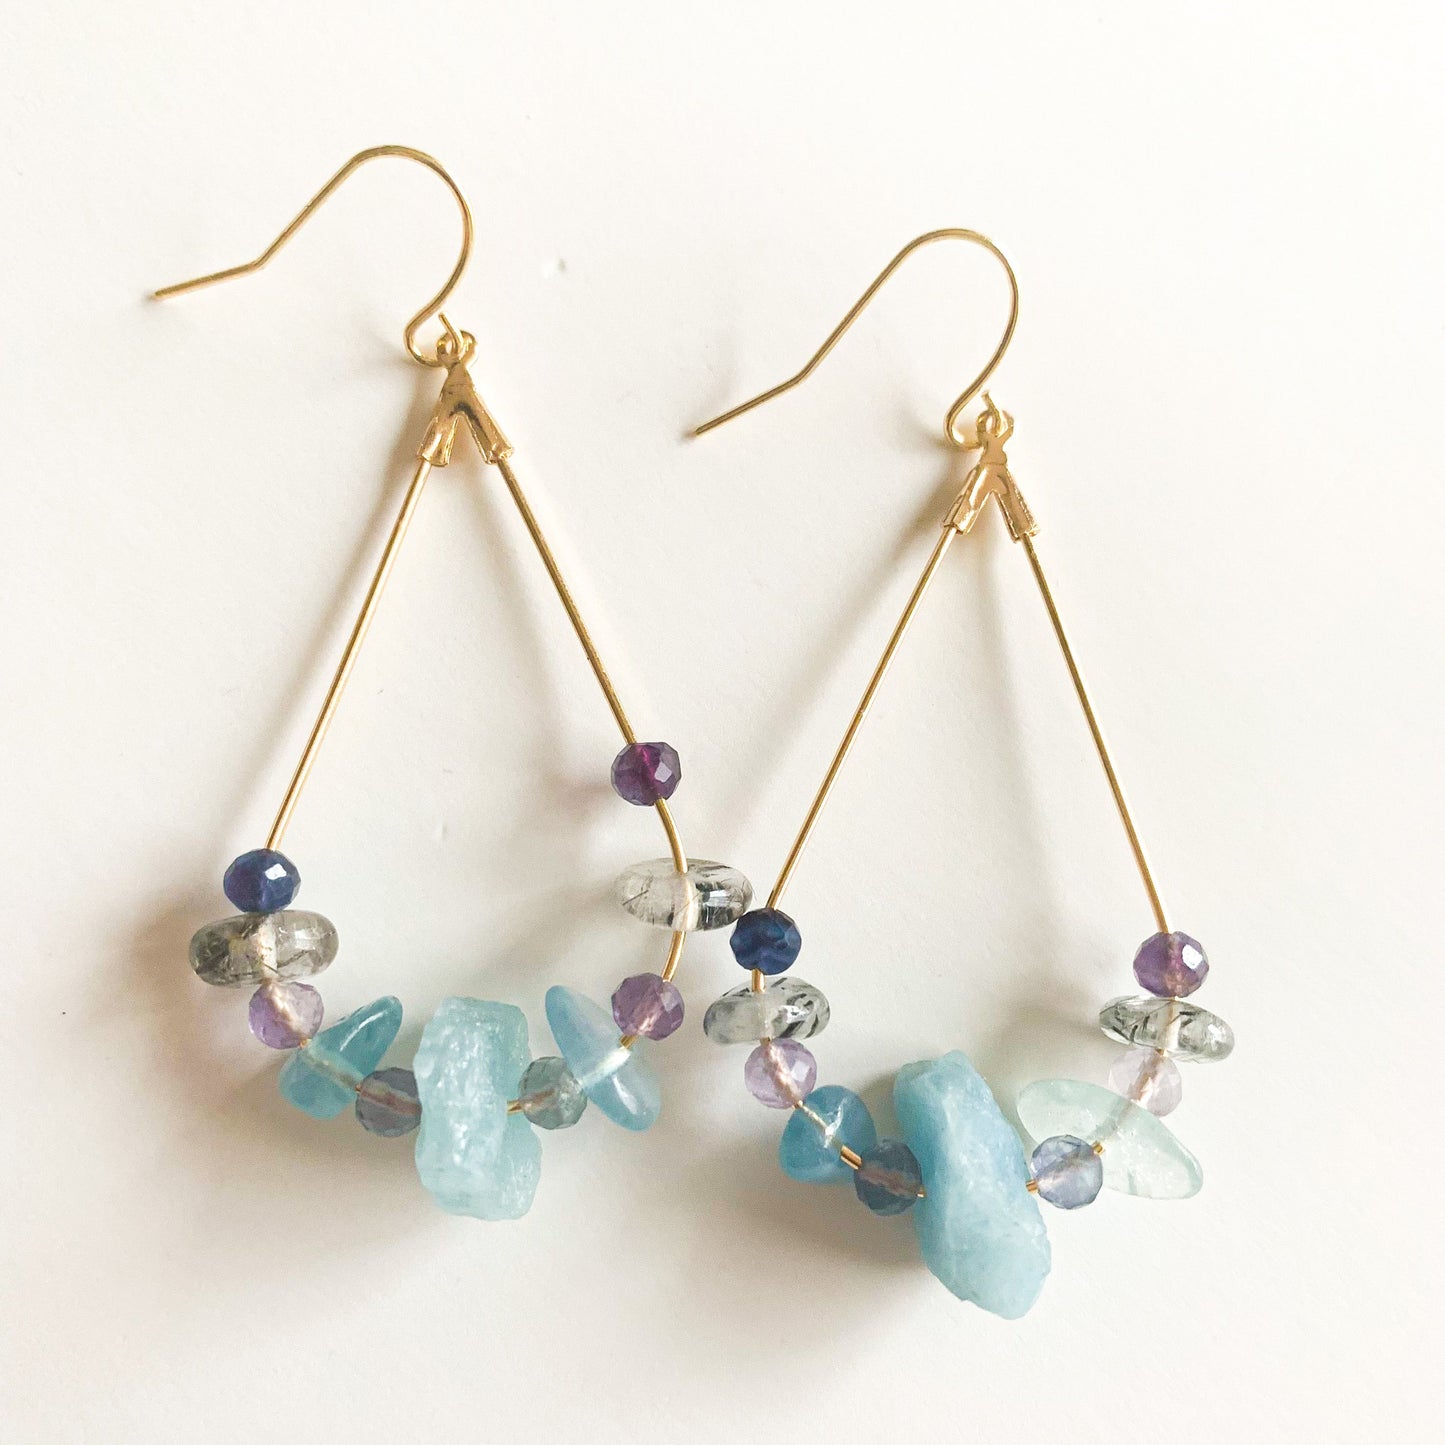 Natural Crystal Teardrop Earrings - Aquamarine, Tourmalinated Quartz, and Fluorite -18kt Gold-Plated